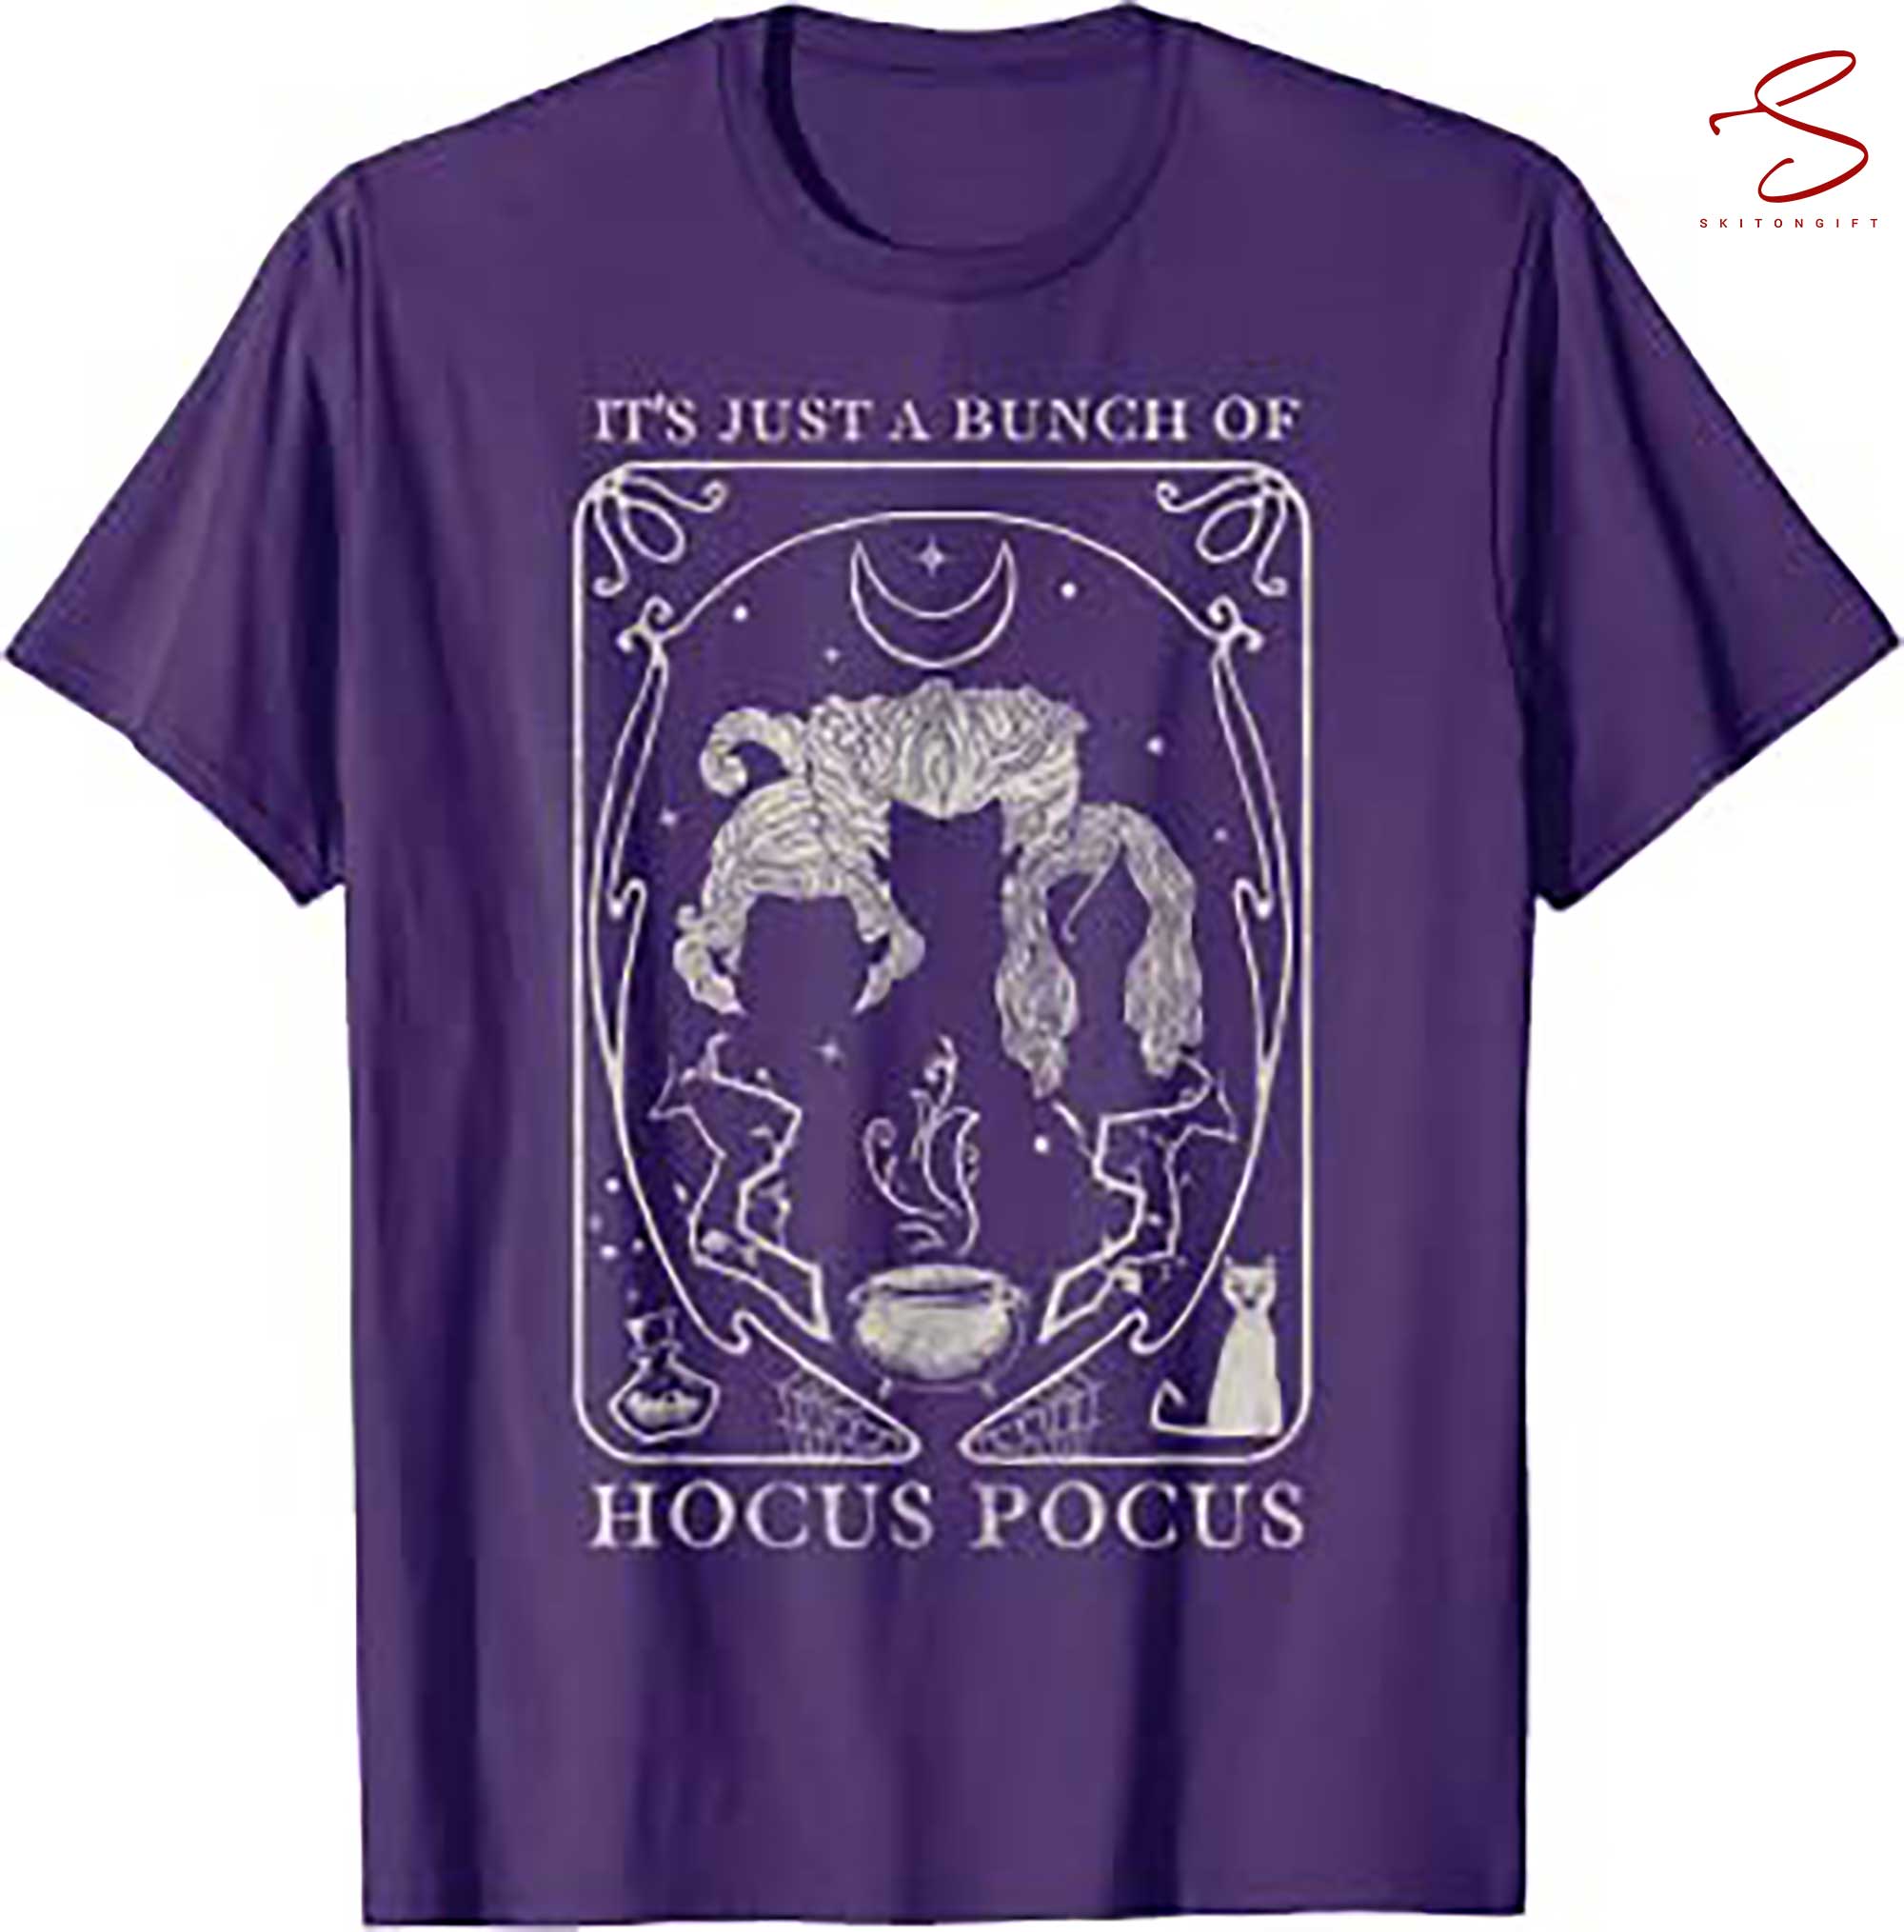 Skitongift Hocus Pocus Just A Bunch Of Hocus Pocus Tarot Card T Shirt, gifts for Dad Mom,Gifts for Him, Her, Gifts for Dad Mom